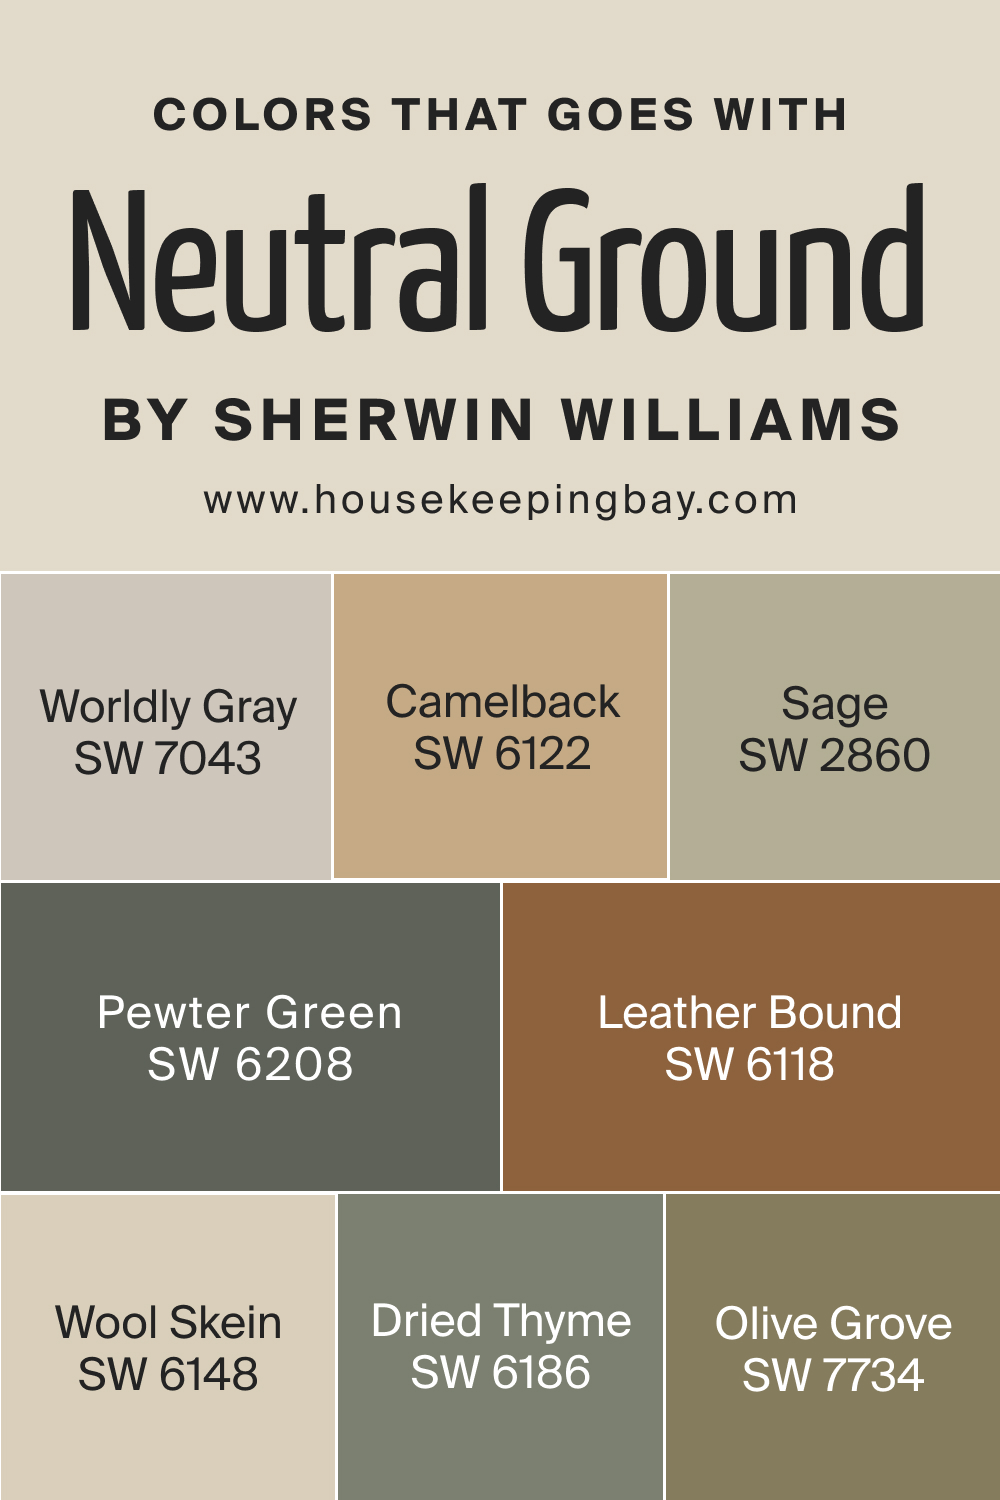 Colors that goes with Neutral Ground by Sherwin Williams